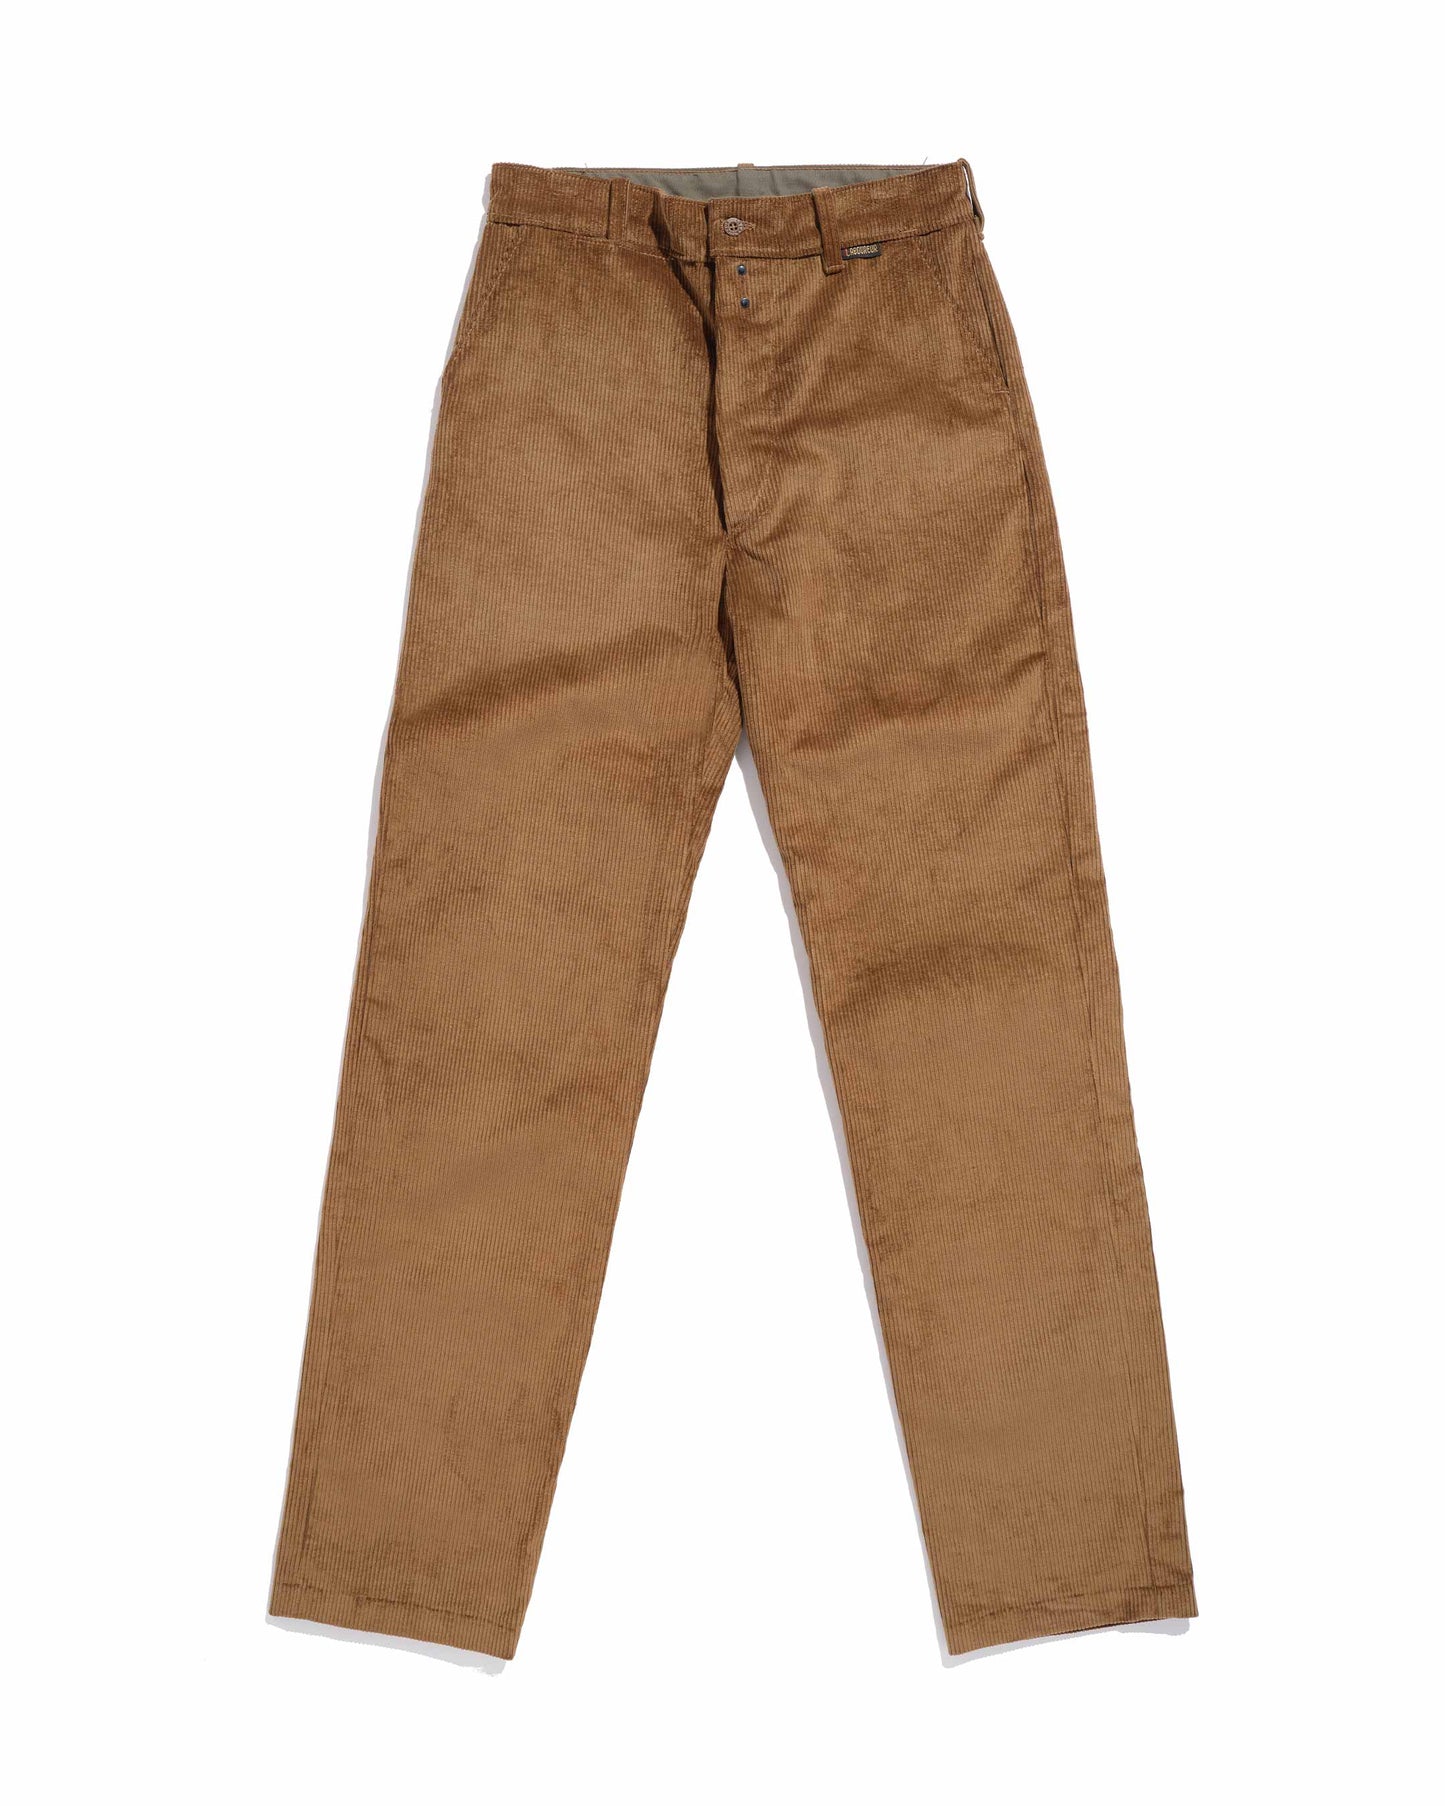 Straight hazelnut cord velvet pants (T34 and T36 discounted)